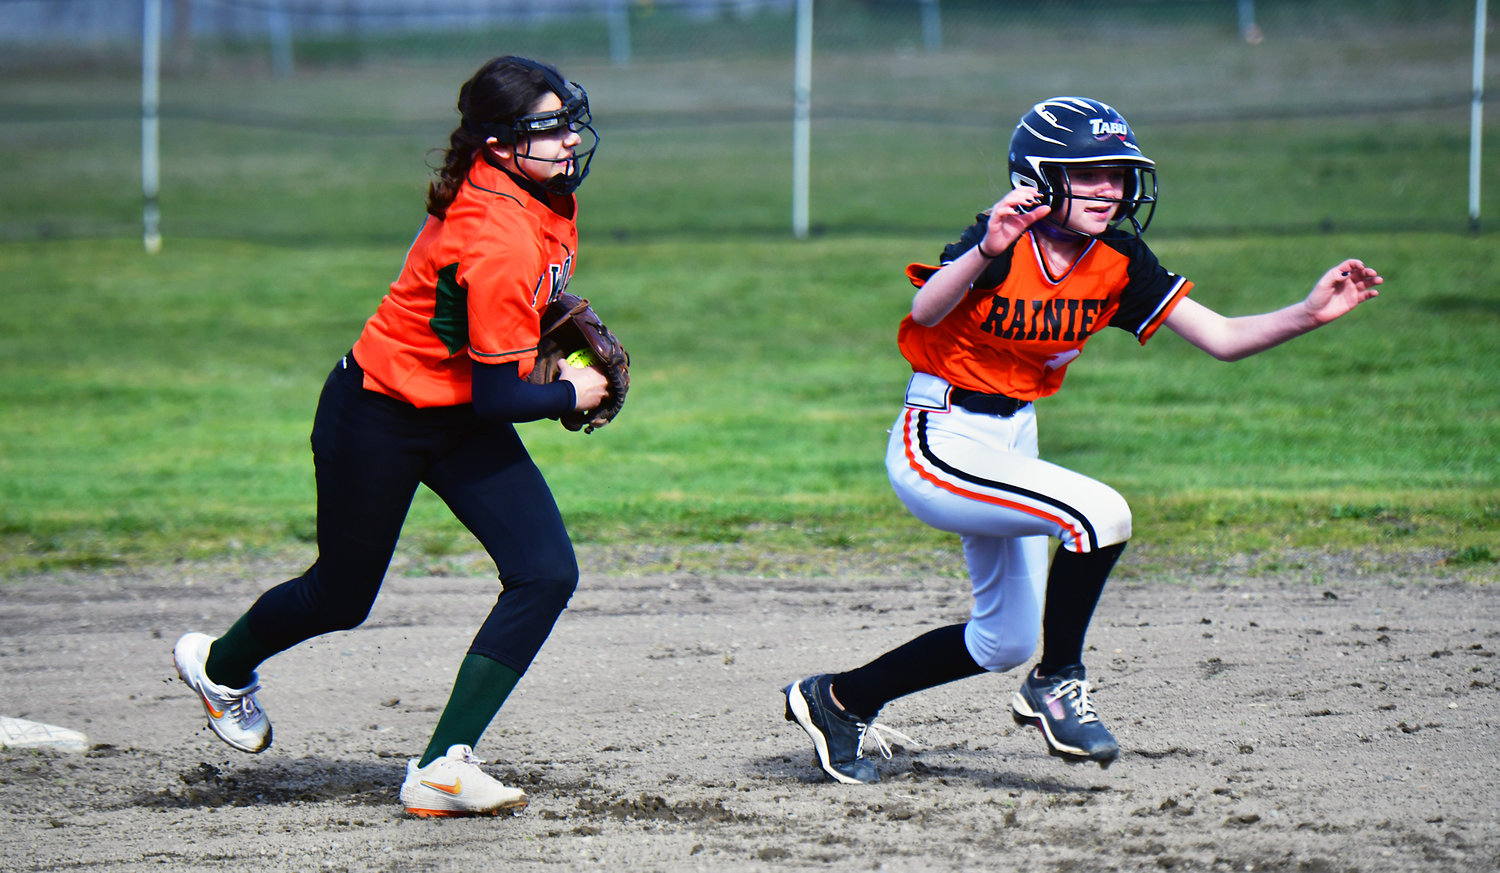 Rainier High School’s Miah Reynolds gets caught in a rundown at second base  during the softball game against Morton-White Pass High School on Monday, March 29, in Rainier.